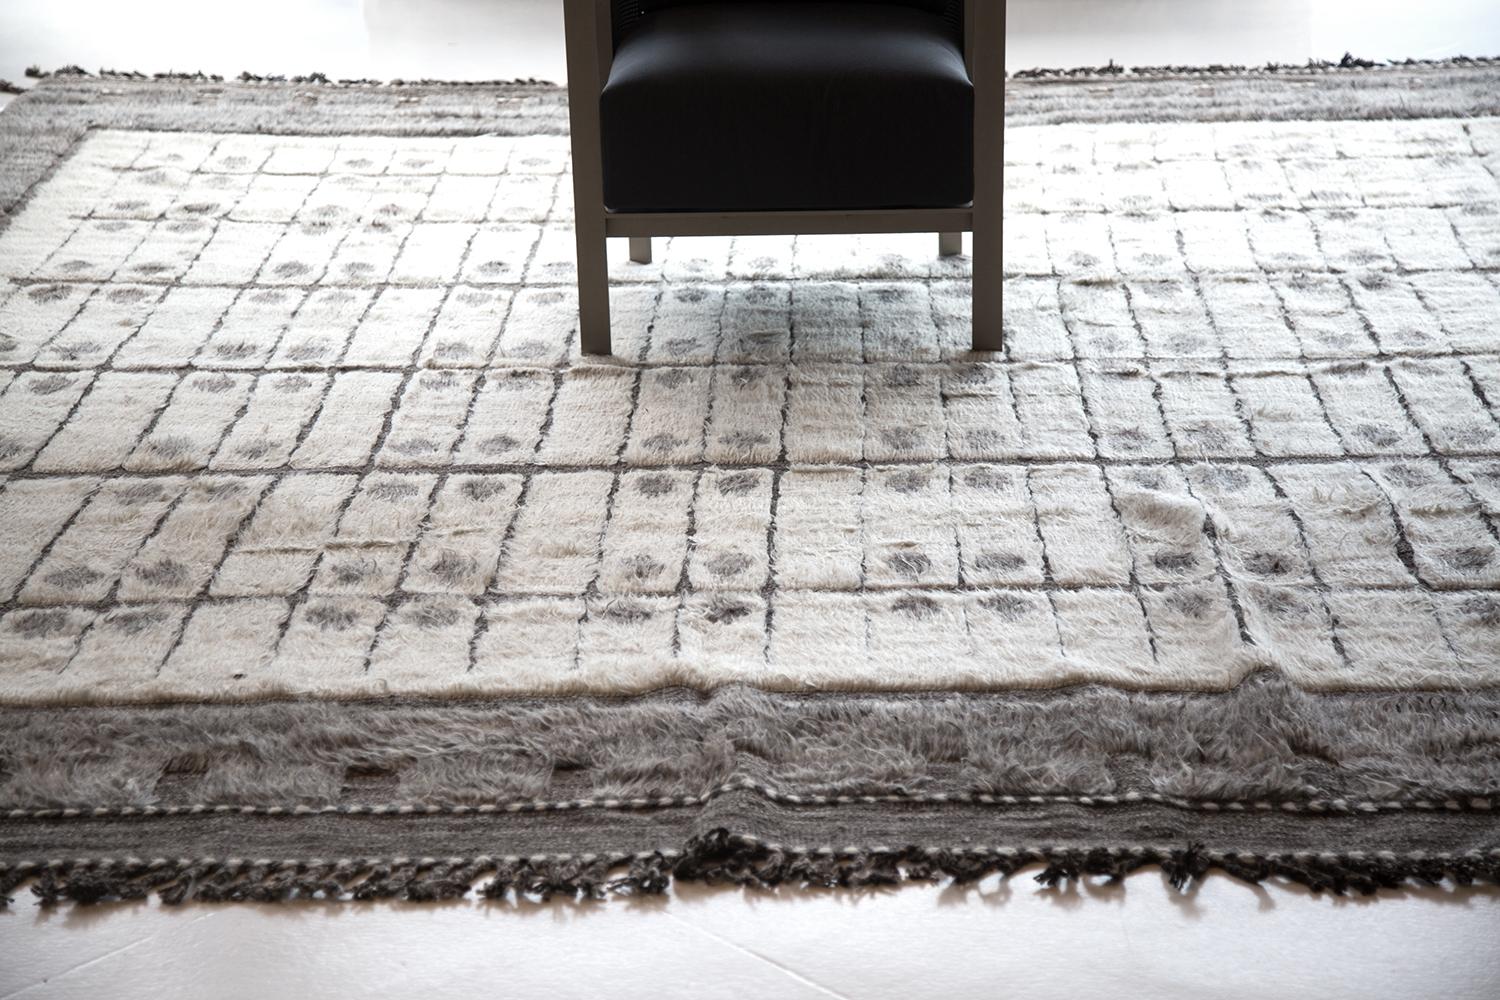 A beautiful and trendy modern Boho Chic rug, rug type / origin: Central Asian rug, date circa modern rug. Size: 11 ft. 5 in x 12 ft. 7 in (3.48 m x 3.84 m). 

This carpet has a warm and luxurious feel. It has a design that is both modern and that